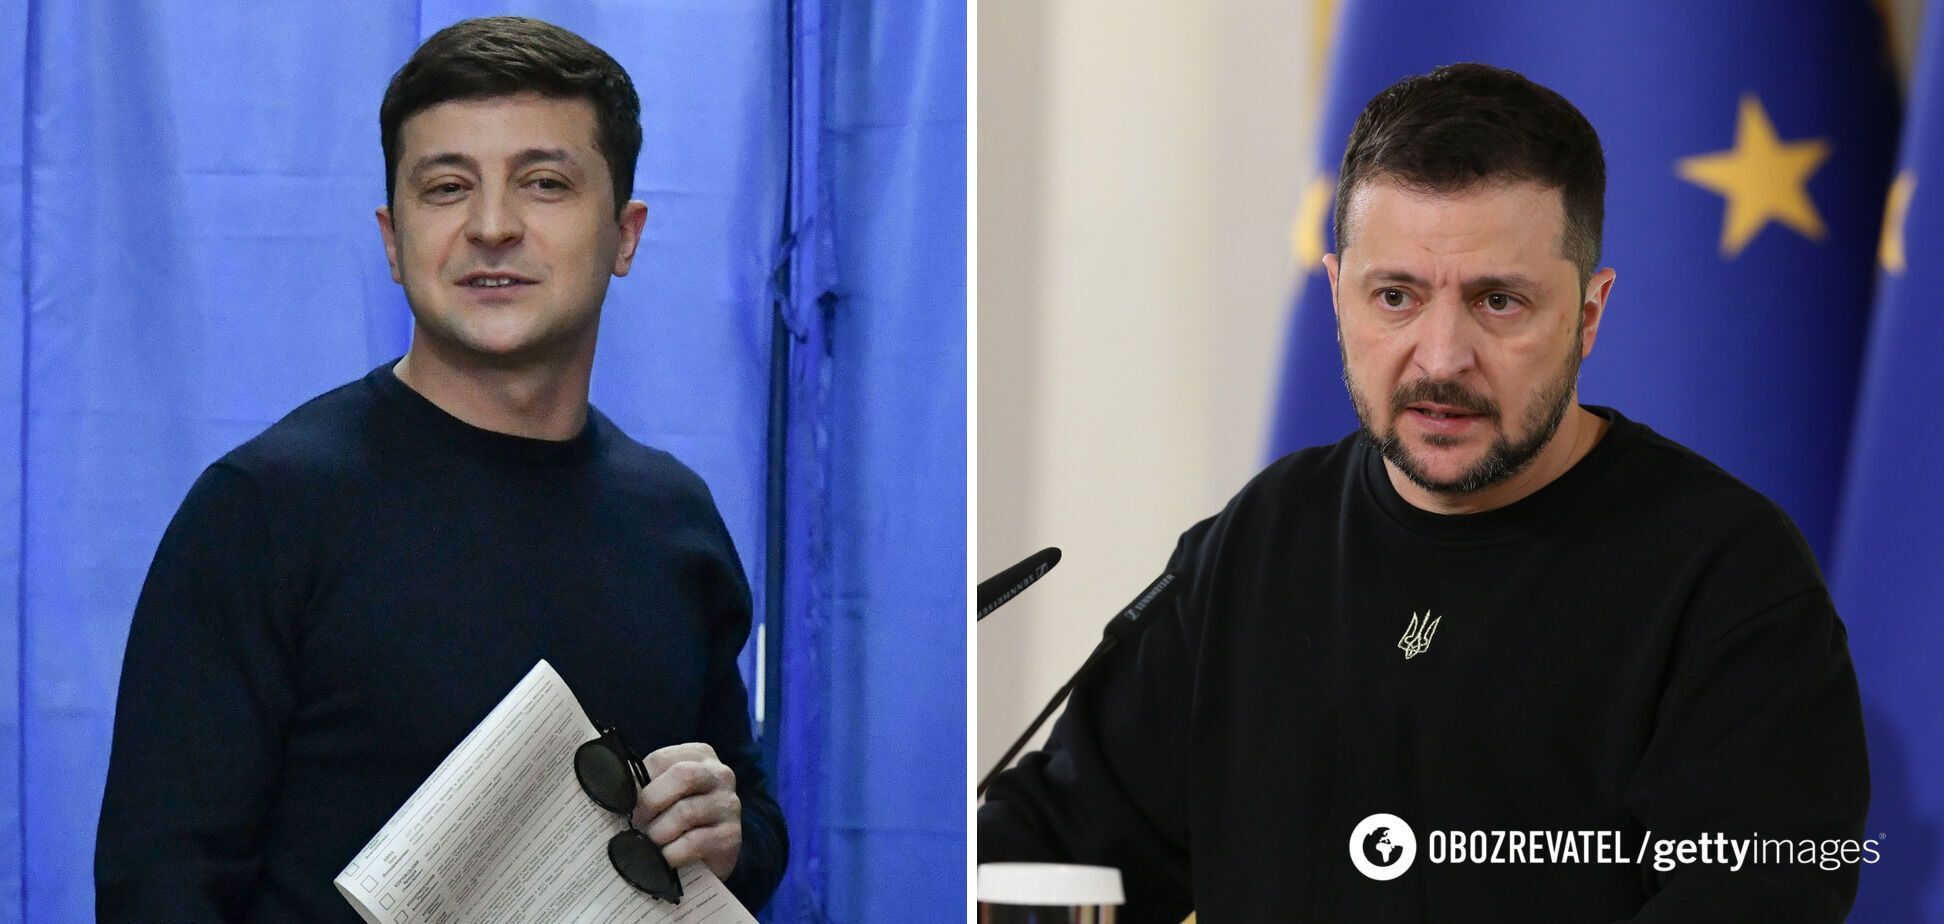 Tired but strong: how Zelensky's look changed after almost two years of full-scale war. Photo